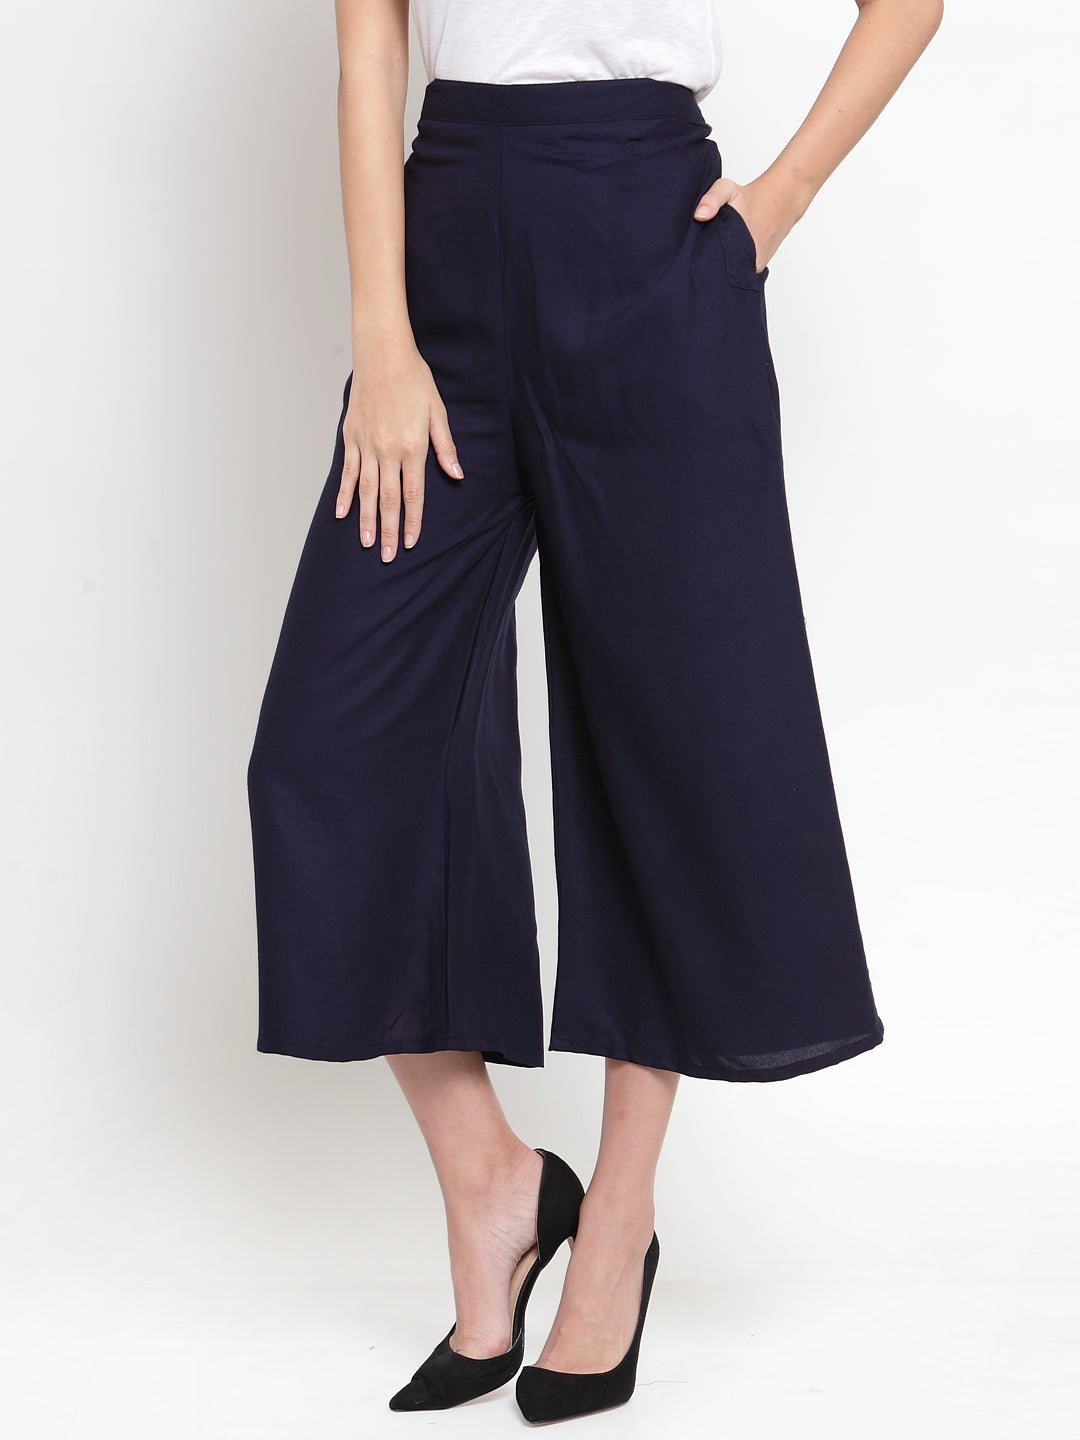 Women's Navy Blue Solid Rayon Culottes - Wahe-NOOR